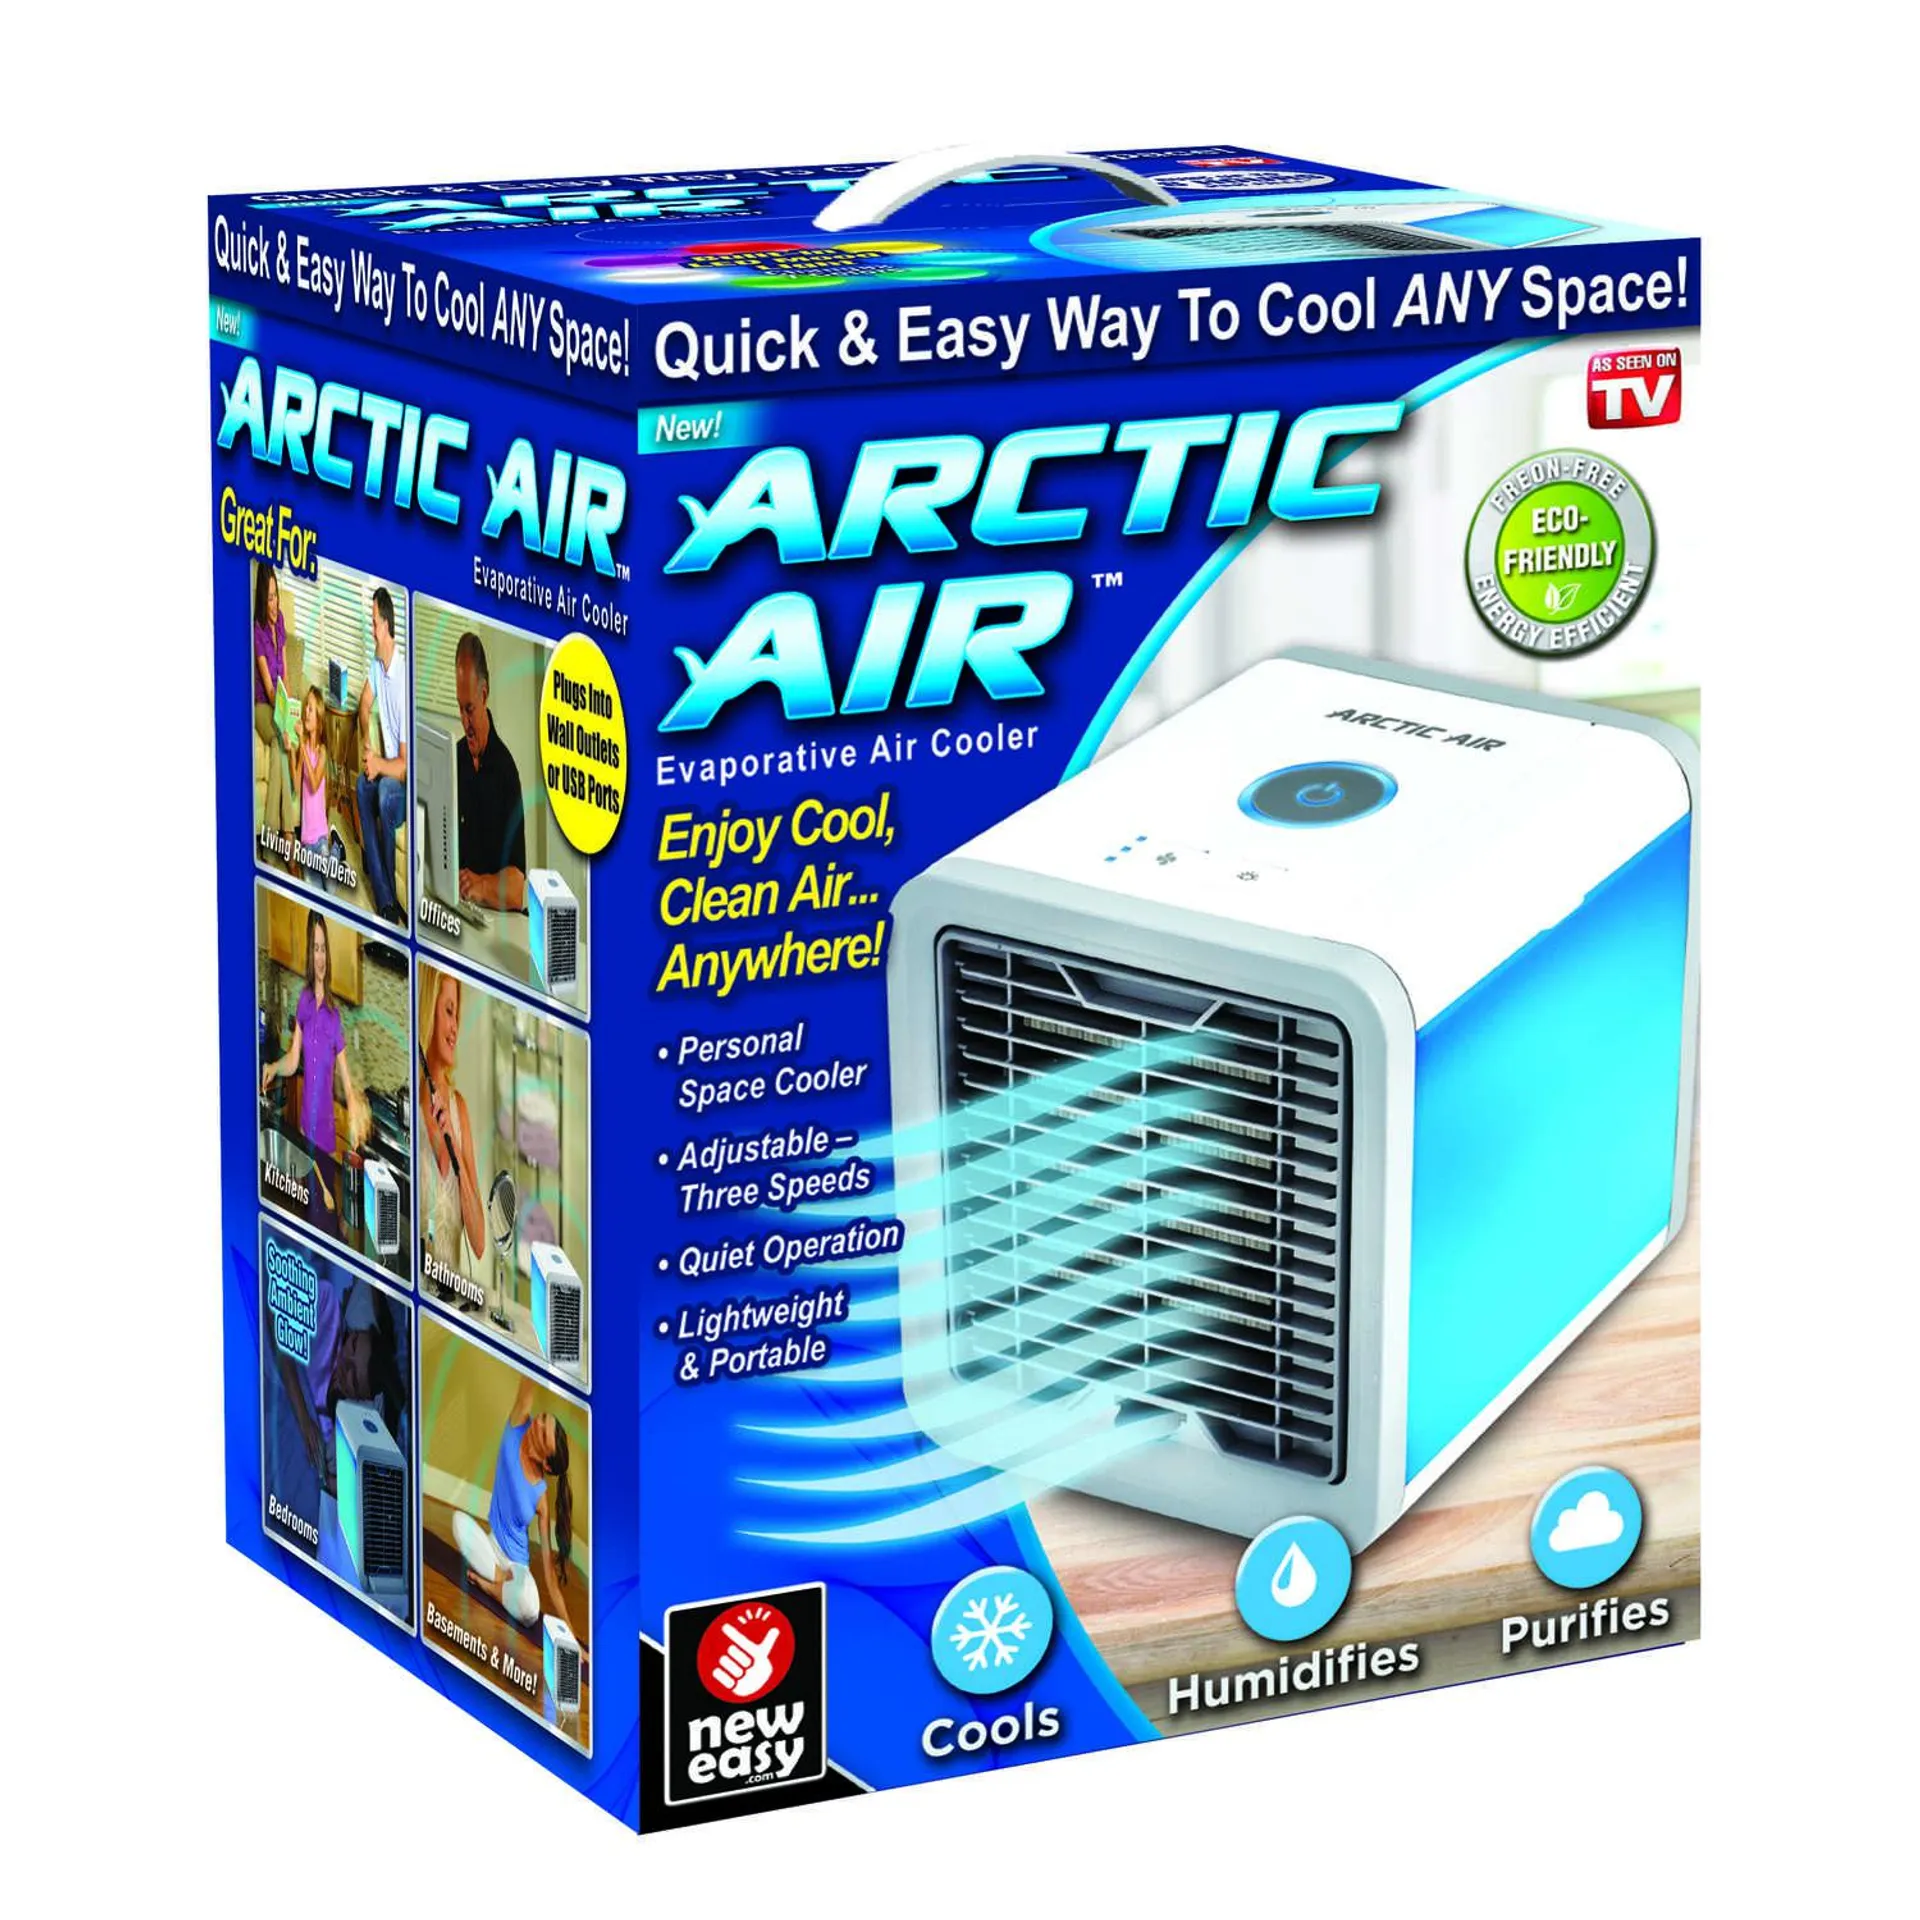 Arctic Air As Seen On TV 45 sq ft Portable Air Conditioner